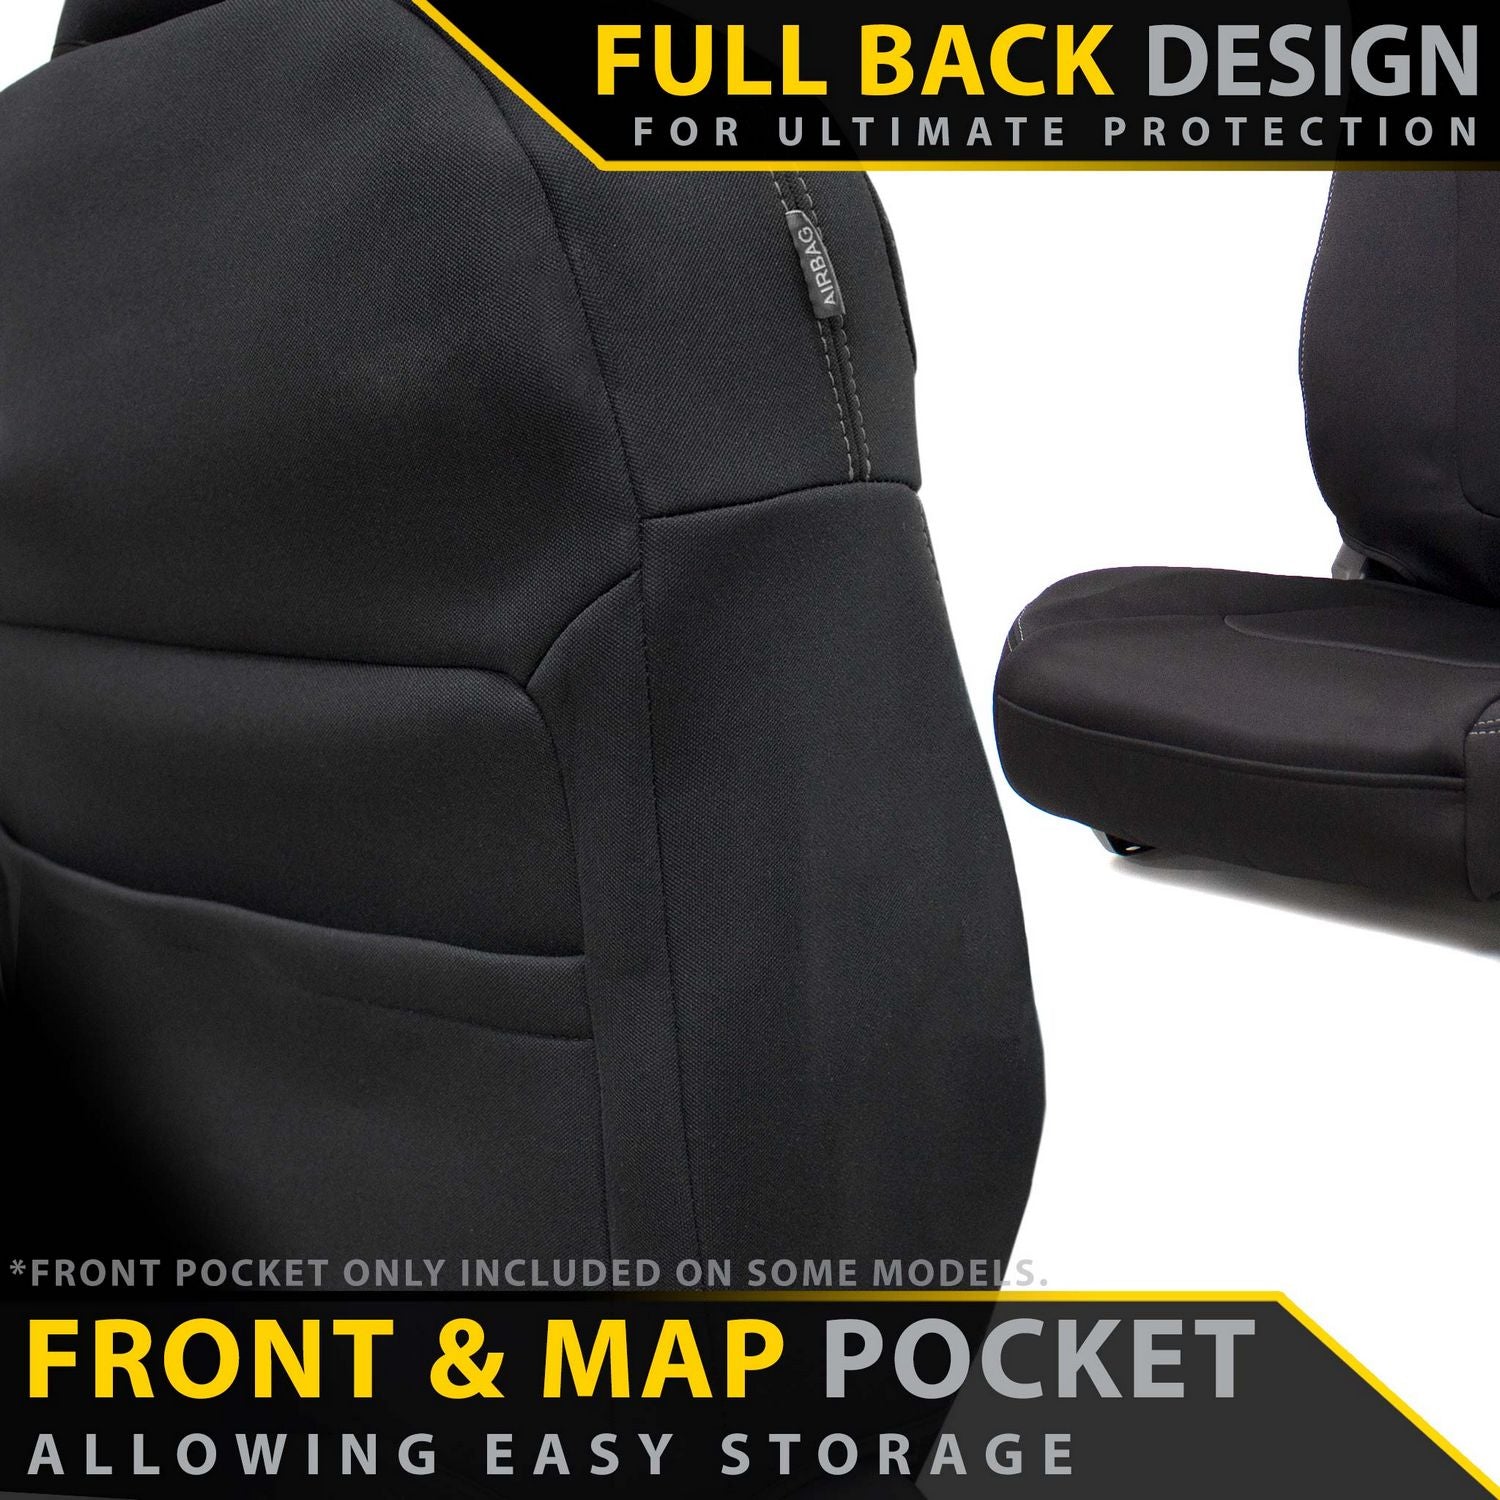 Toyota Hilux 7th Gen Bucket + 3/4 Bench Seat Neoprene 2x Front Seat Covers (Made to Order)